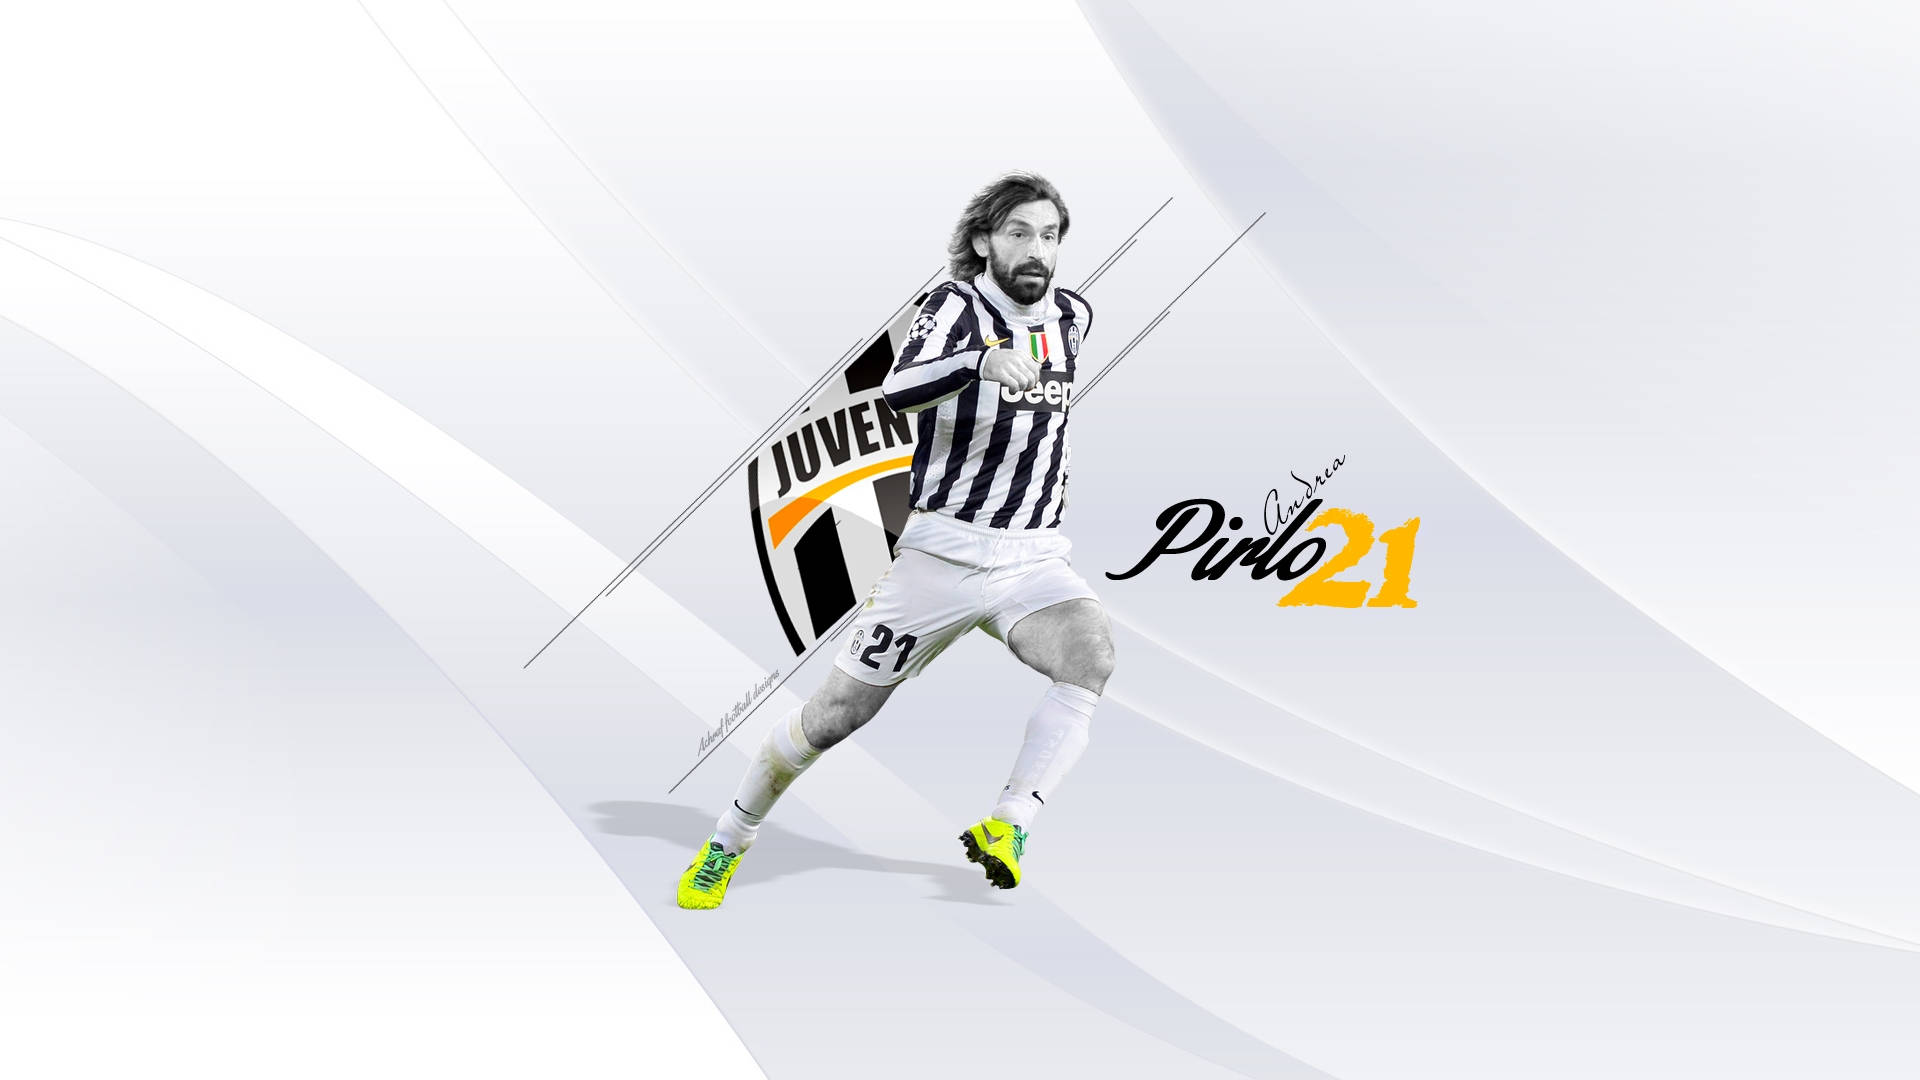 Iconic Footballer Andrea Pirlo against a White Background Wallpaper